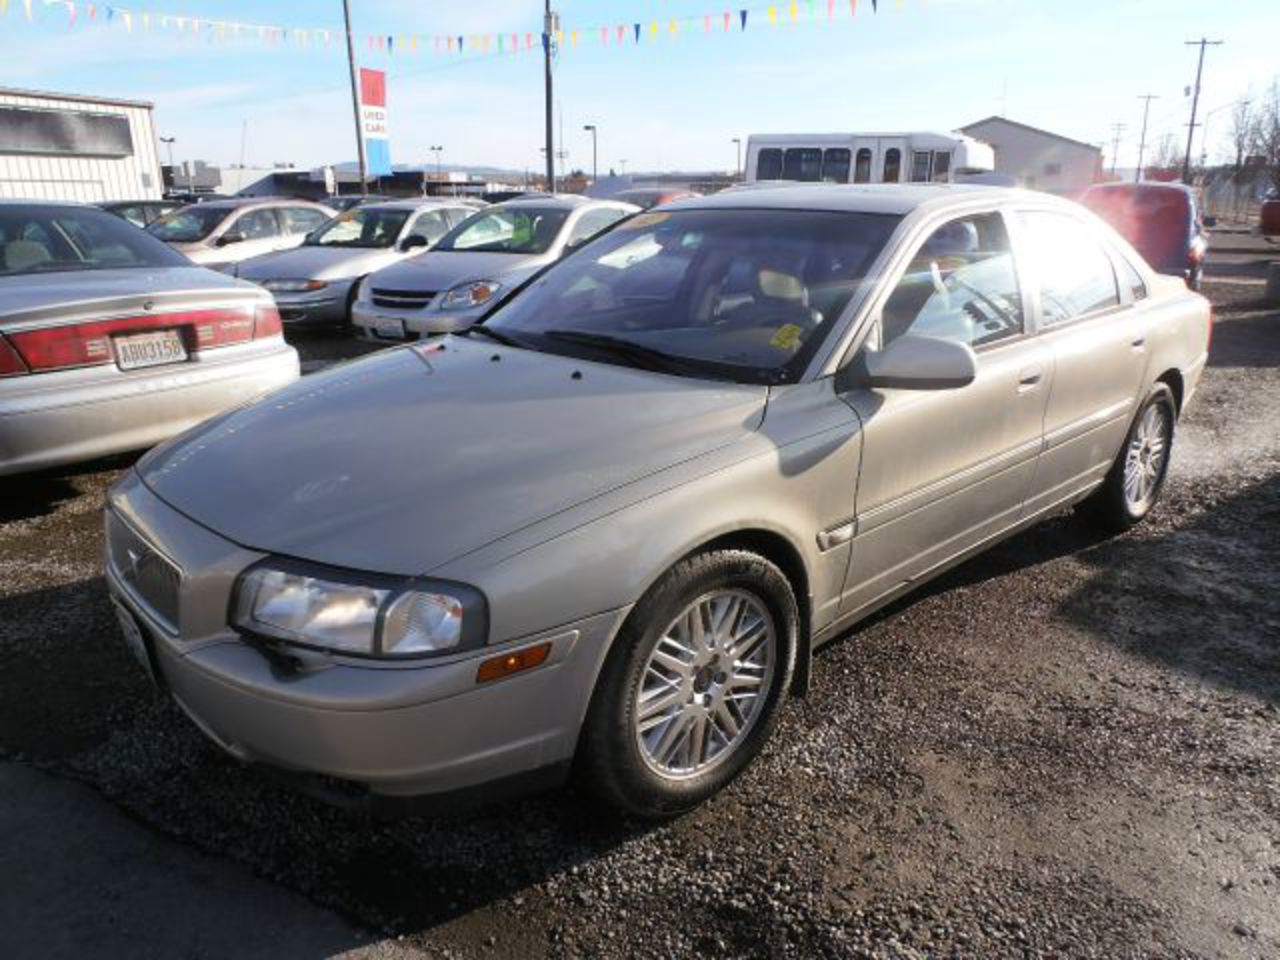 2002 VOLVO S80 29 gold in typical volvo fashion volvo continued to improve